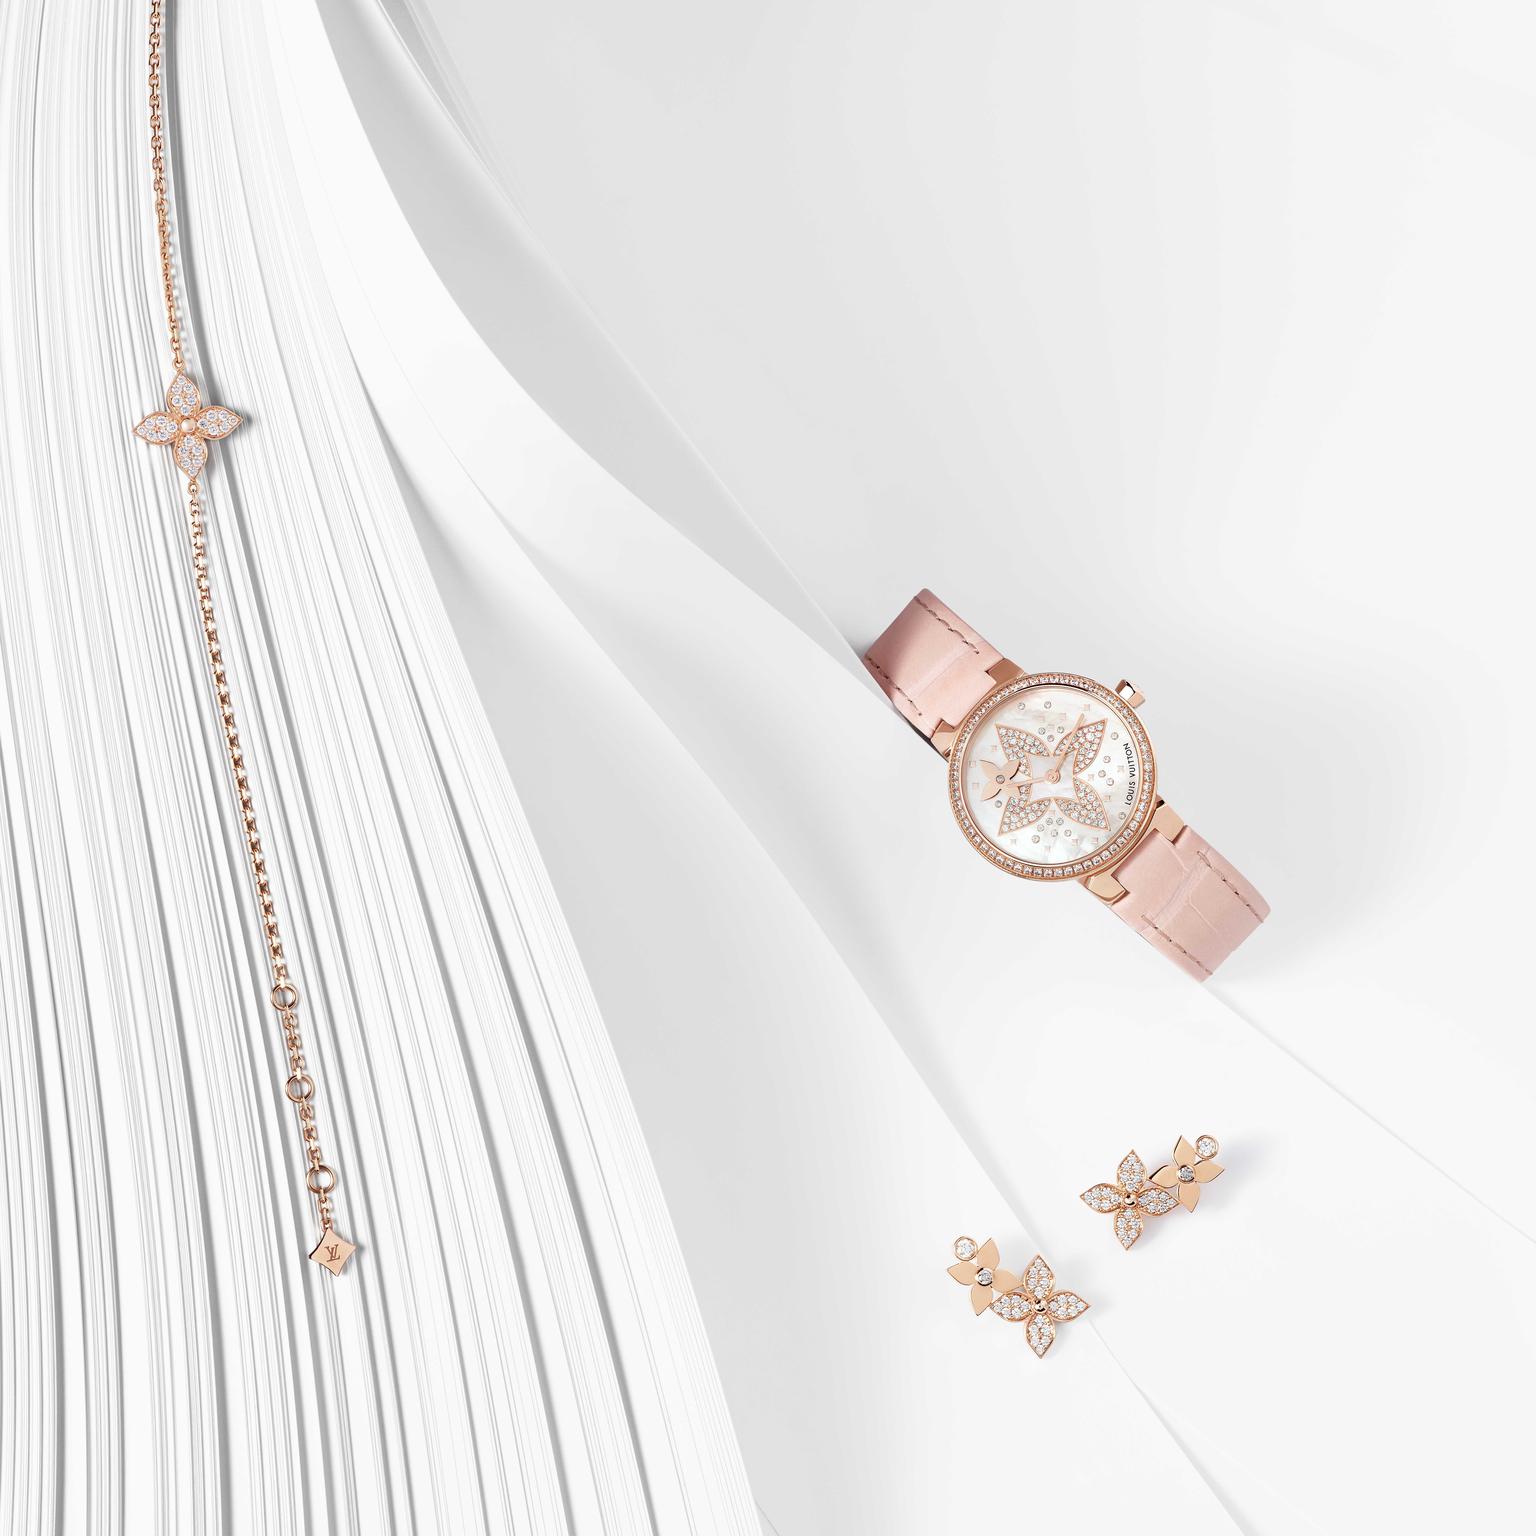 Louis Vuitton Star Blossom jewels and watch.